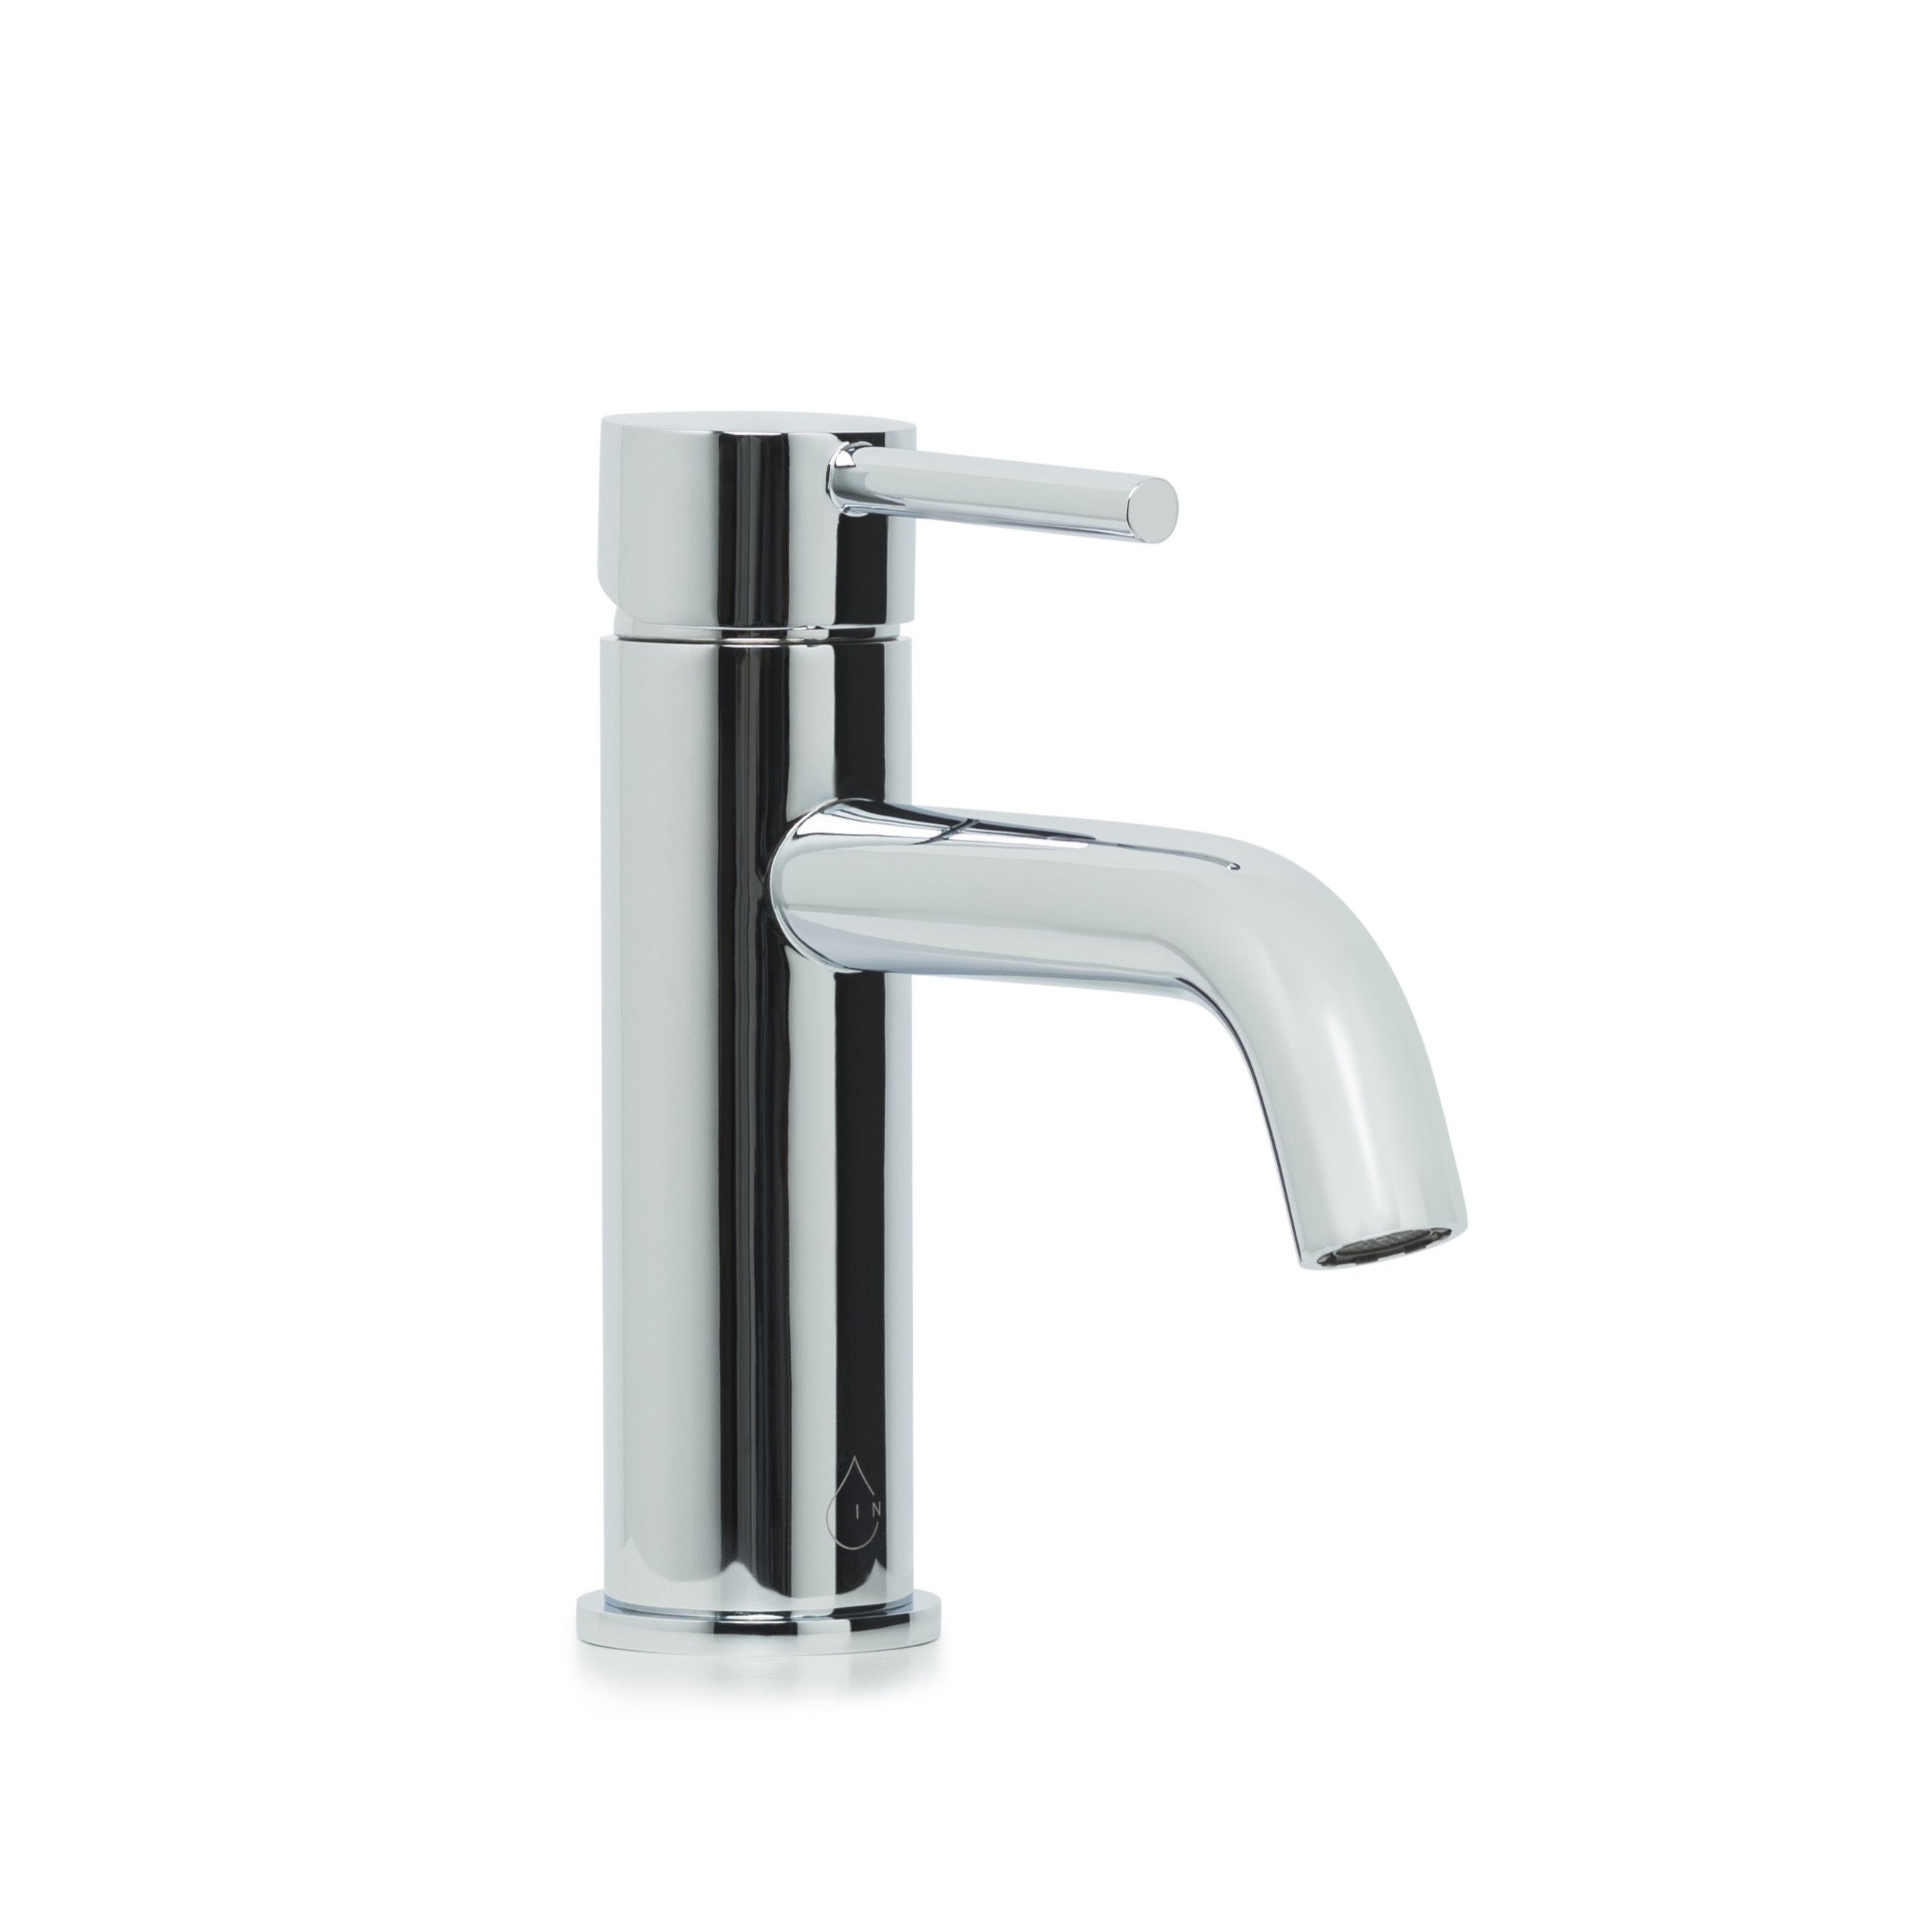 Bondi Pin Lever Basin Mixer with Curved Spout in Chrome